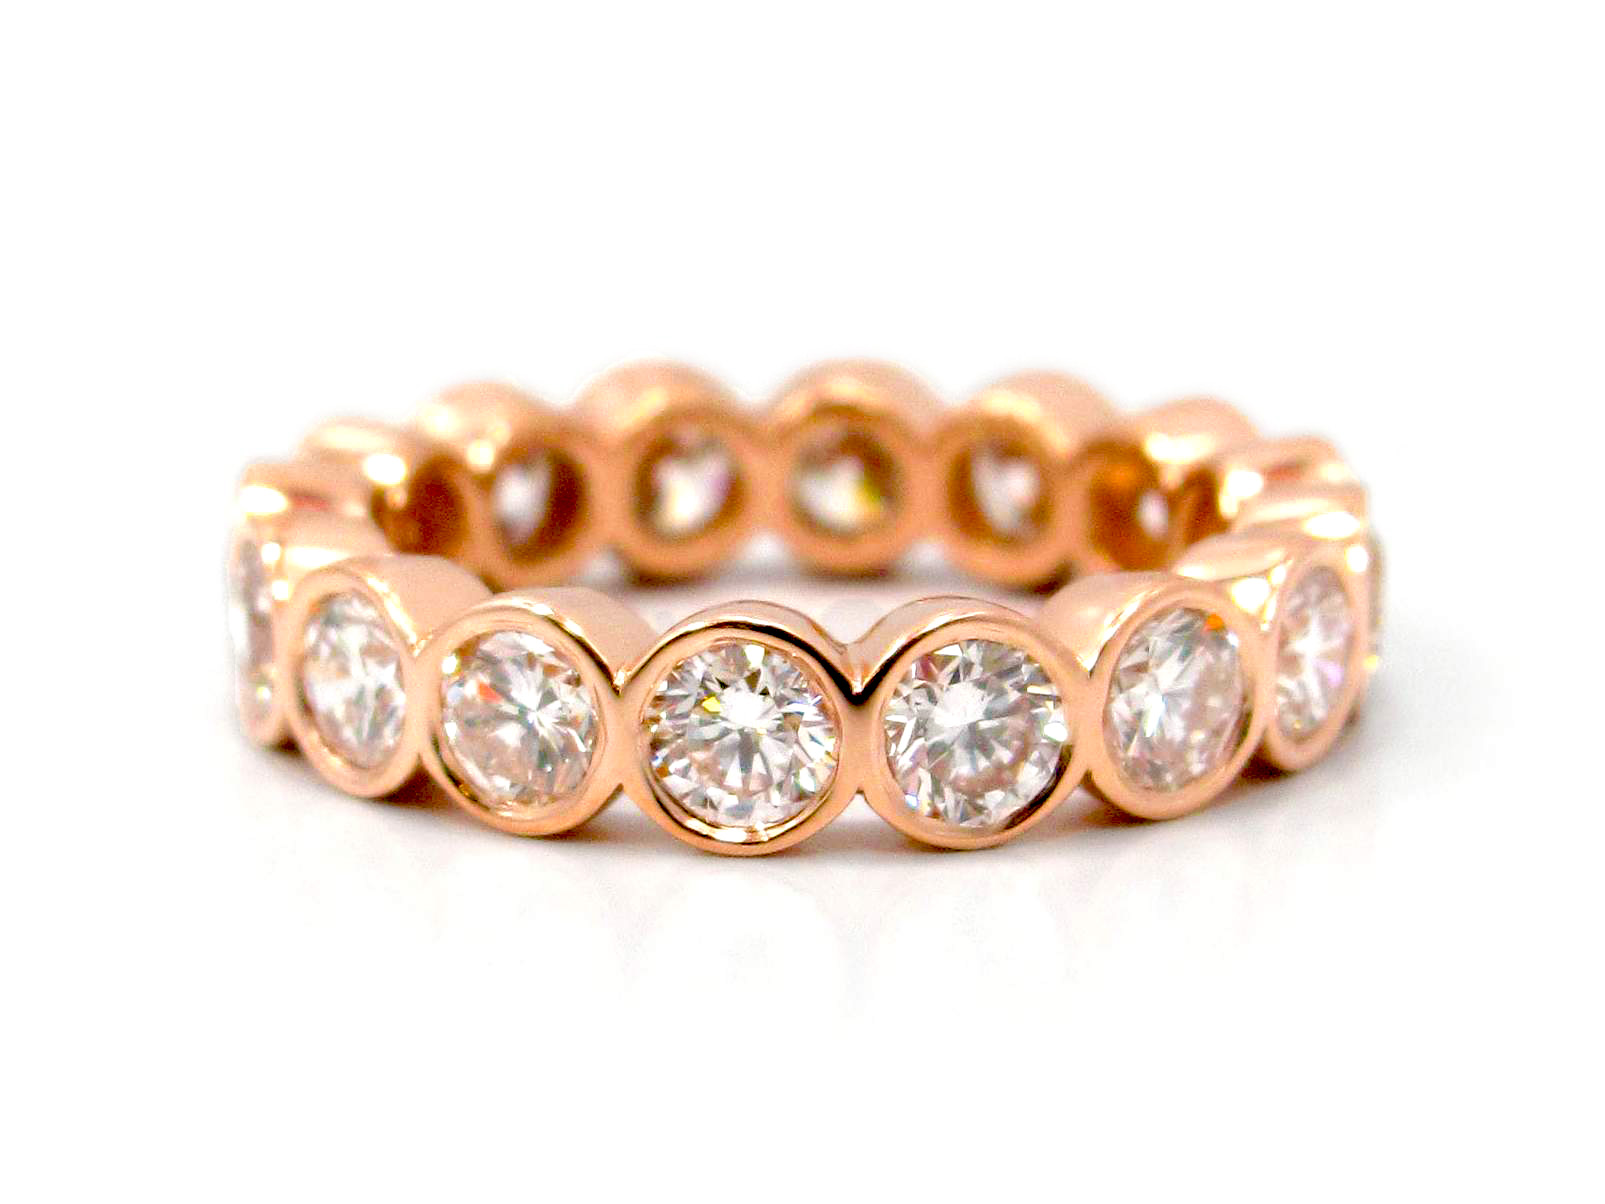 This is a picture of a 14k Rose Gold Bezel Set Diamond Eternity Band